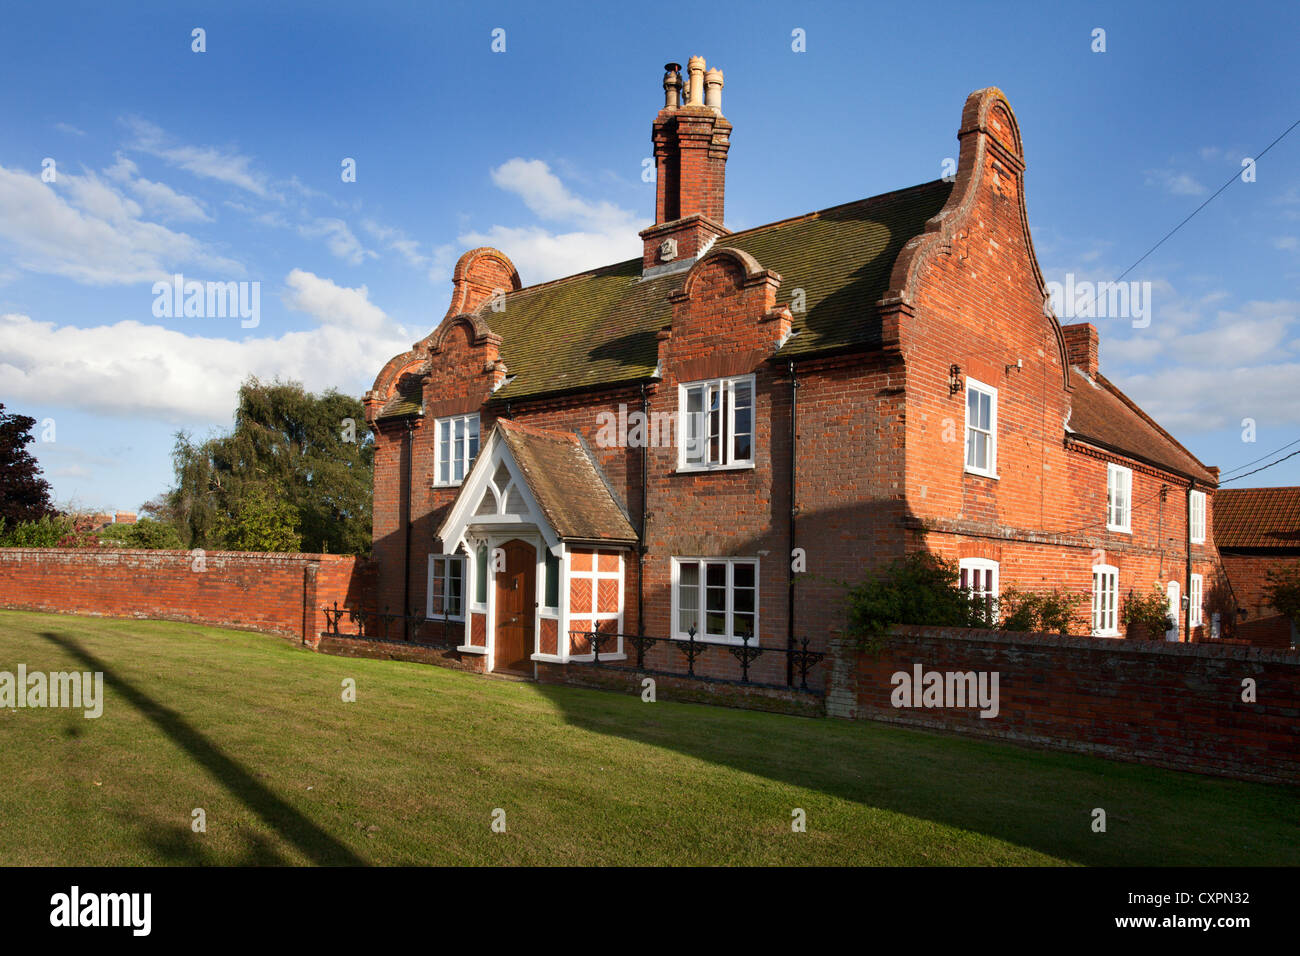 Imposing Red Brick House in Orford Suffolk England Stock Photo